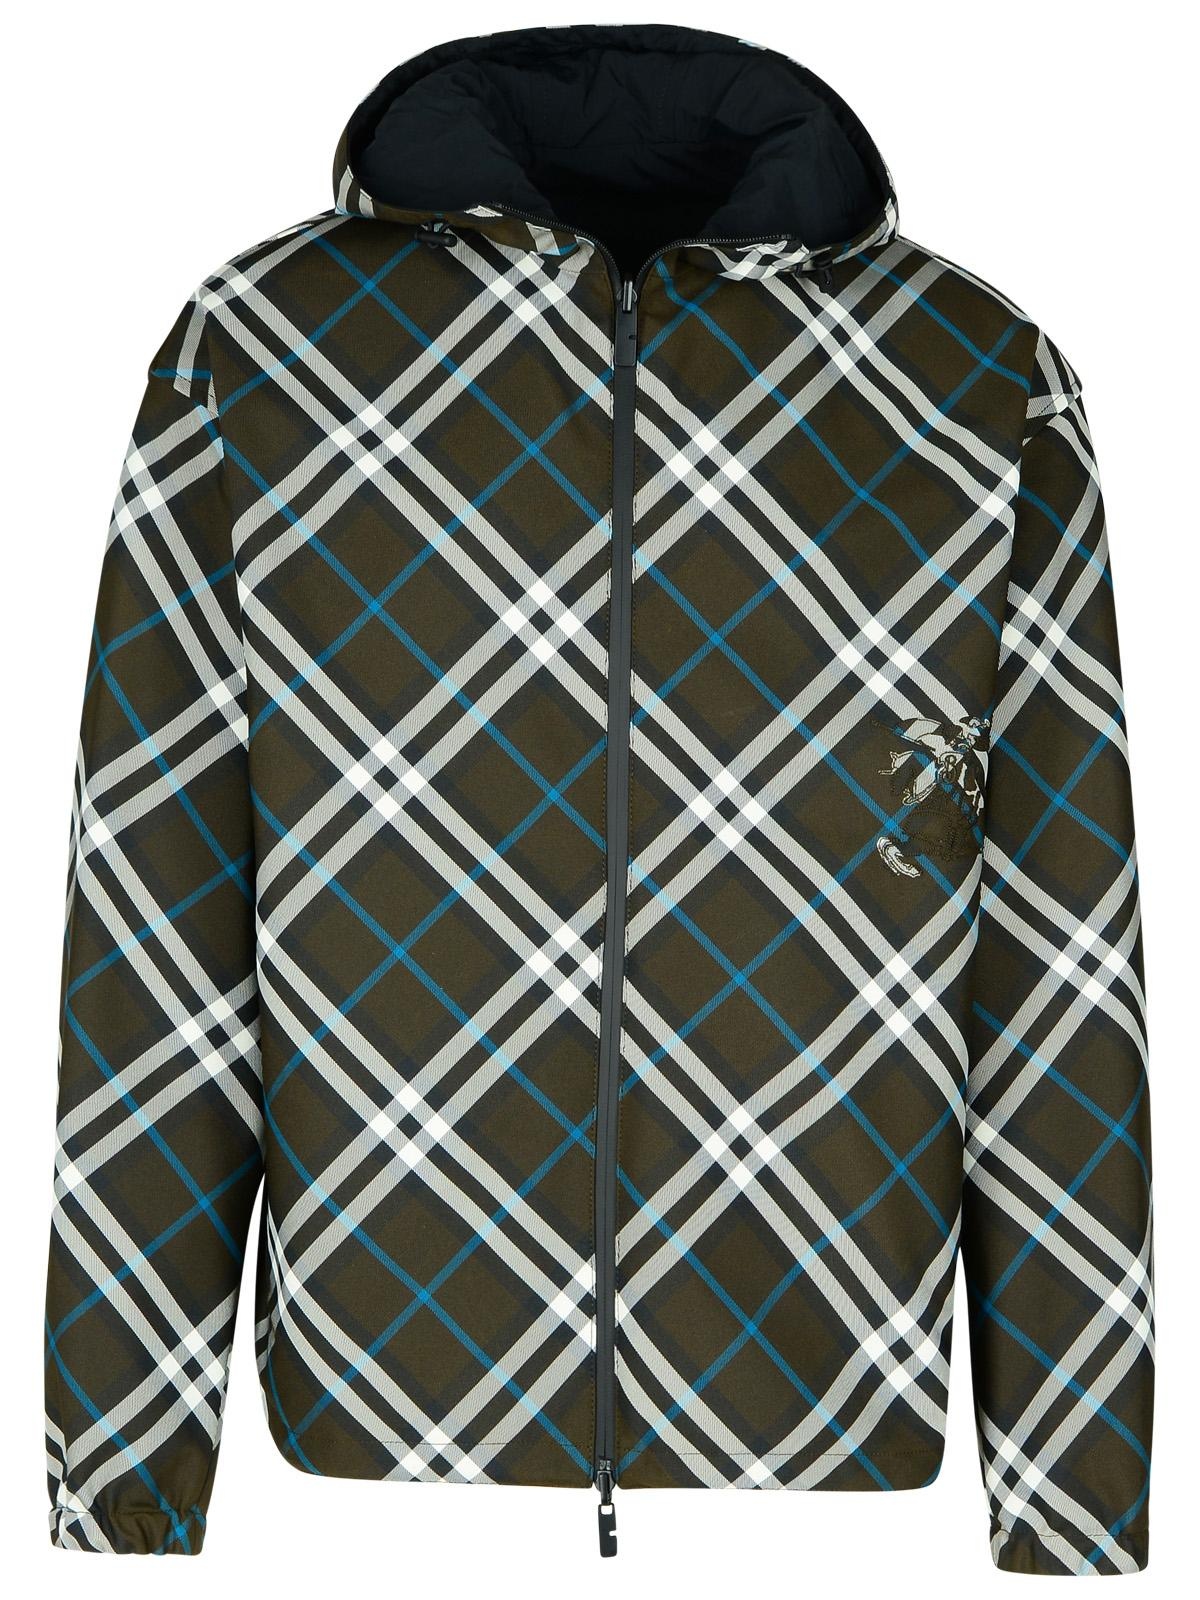 Burberry 'Check' Reversible Green Polyester Jacket - 1